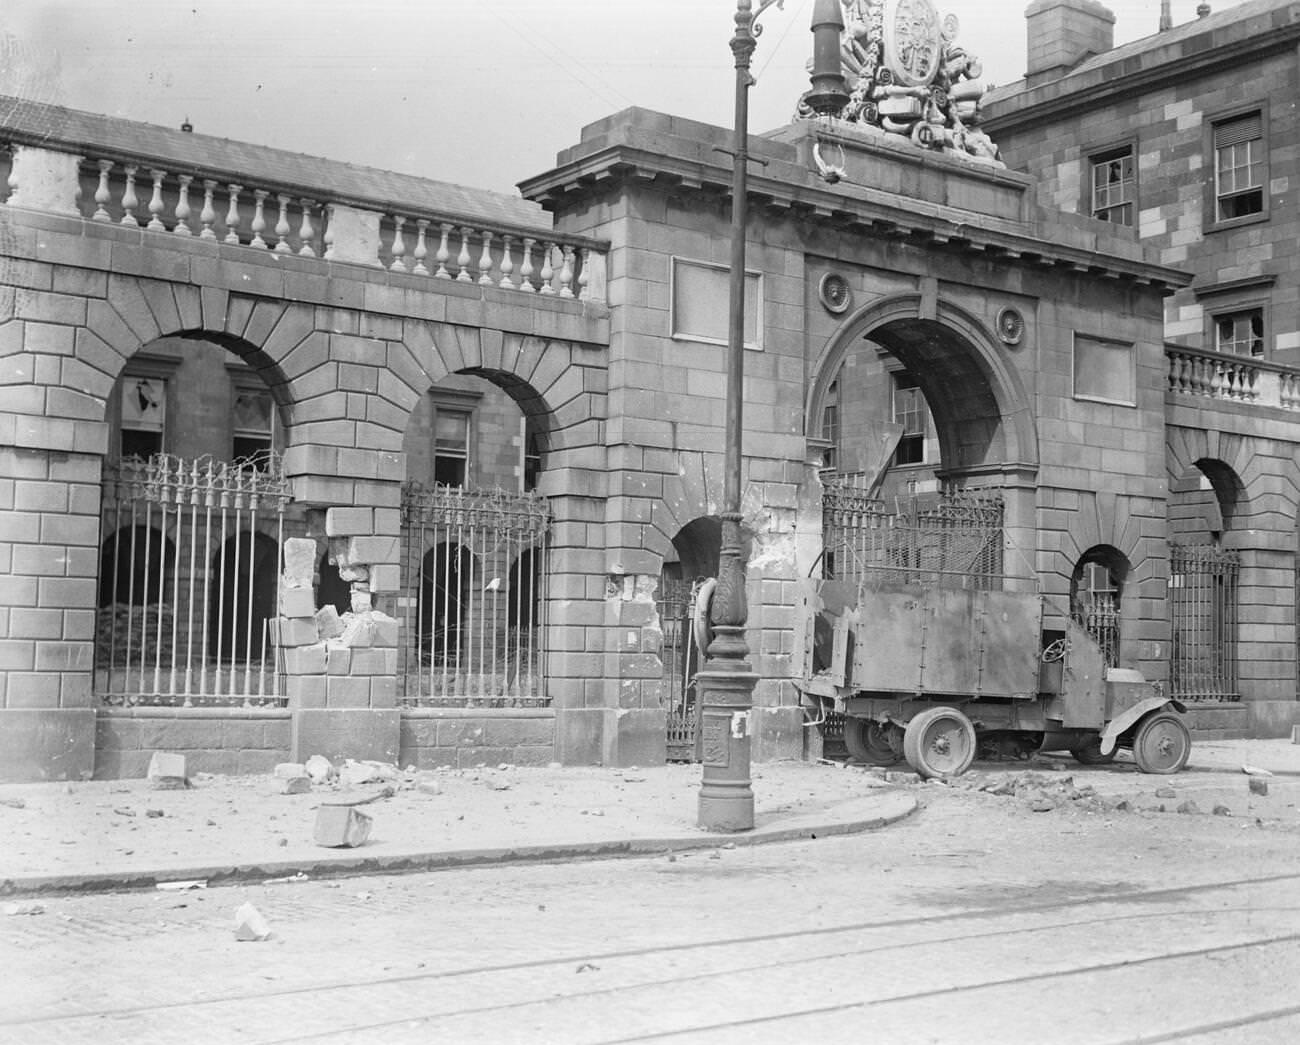 The Four Courts in Dublin showing an armored car used in the attack by the Irish Free State troops, 1922.